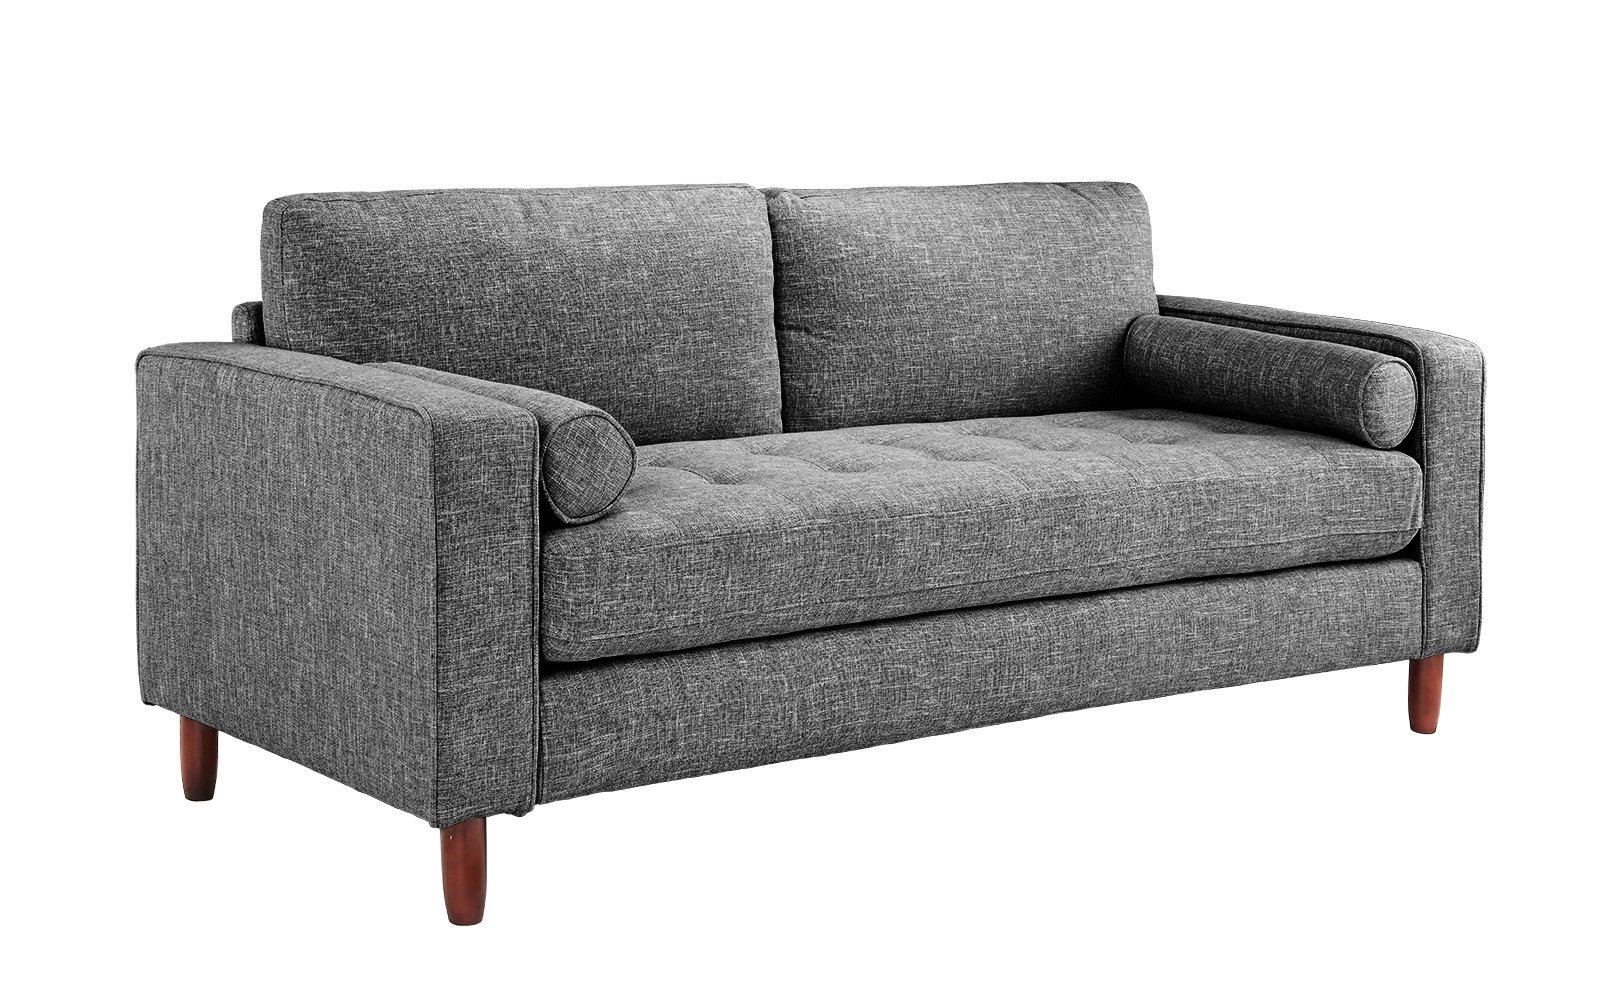 Modern Fabric Sofa with Tufted Linen Fabric - Living Room Couch (Light ...